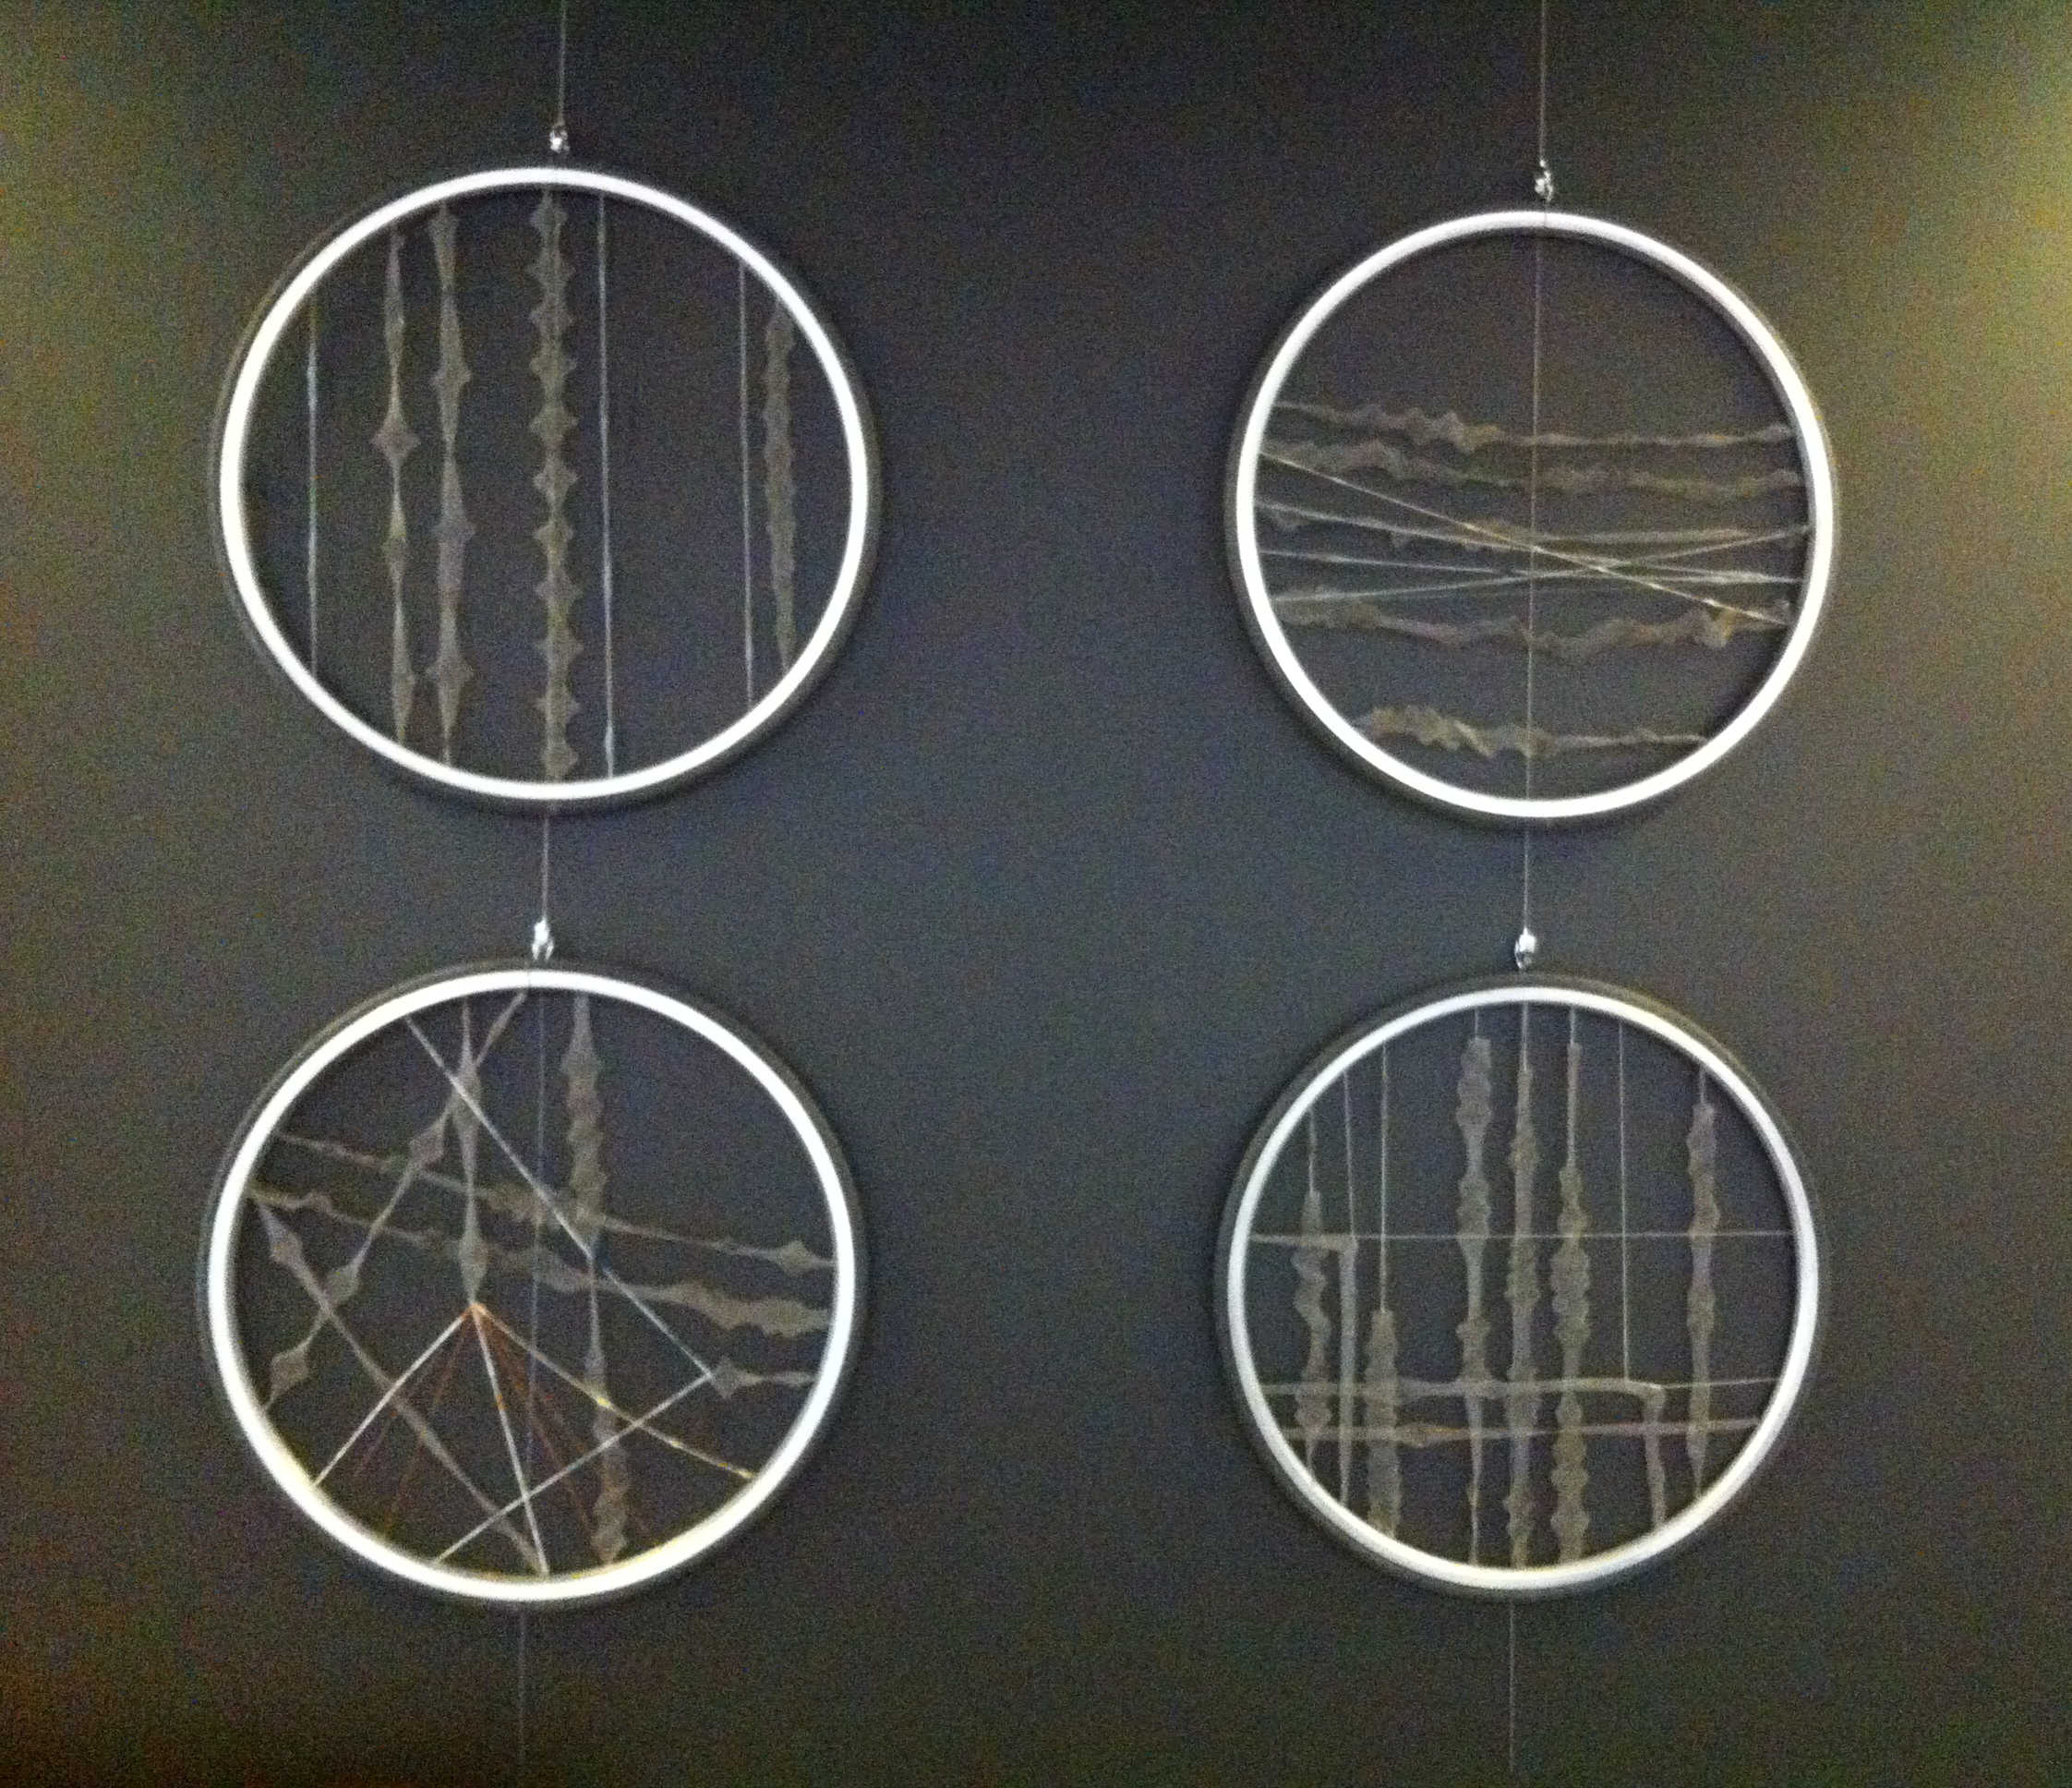 Sculpture "My Line of Site" by Libby Bloxham. Hanging in a 2x2 grid are four large hoops that appear to be bicycle tyres. Across the centre of each hoop are arranged many thin strips of floaty, irregularly shaped and gathered fabric, giving the impression of many straight lines. The first hoop features vertical lines, the second horizontal lines, the fourth a combination of vertical and horizontal lines, and the third diagonal lines in all directions.